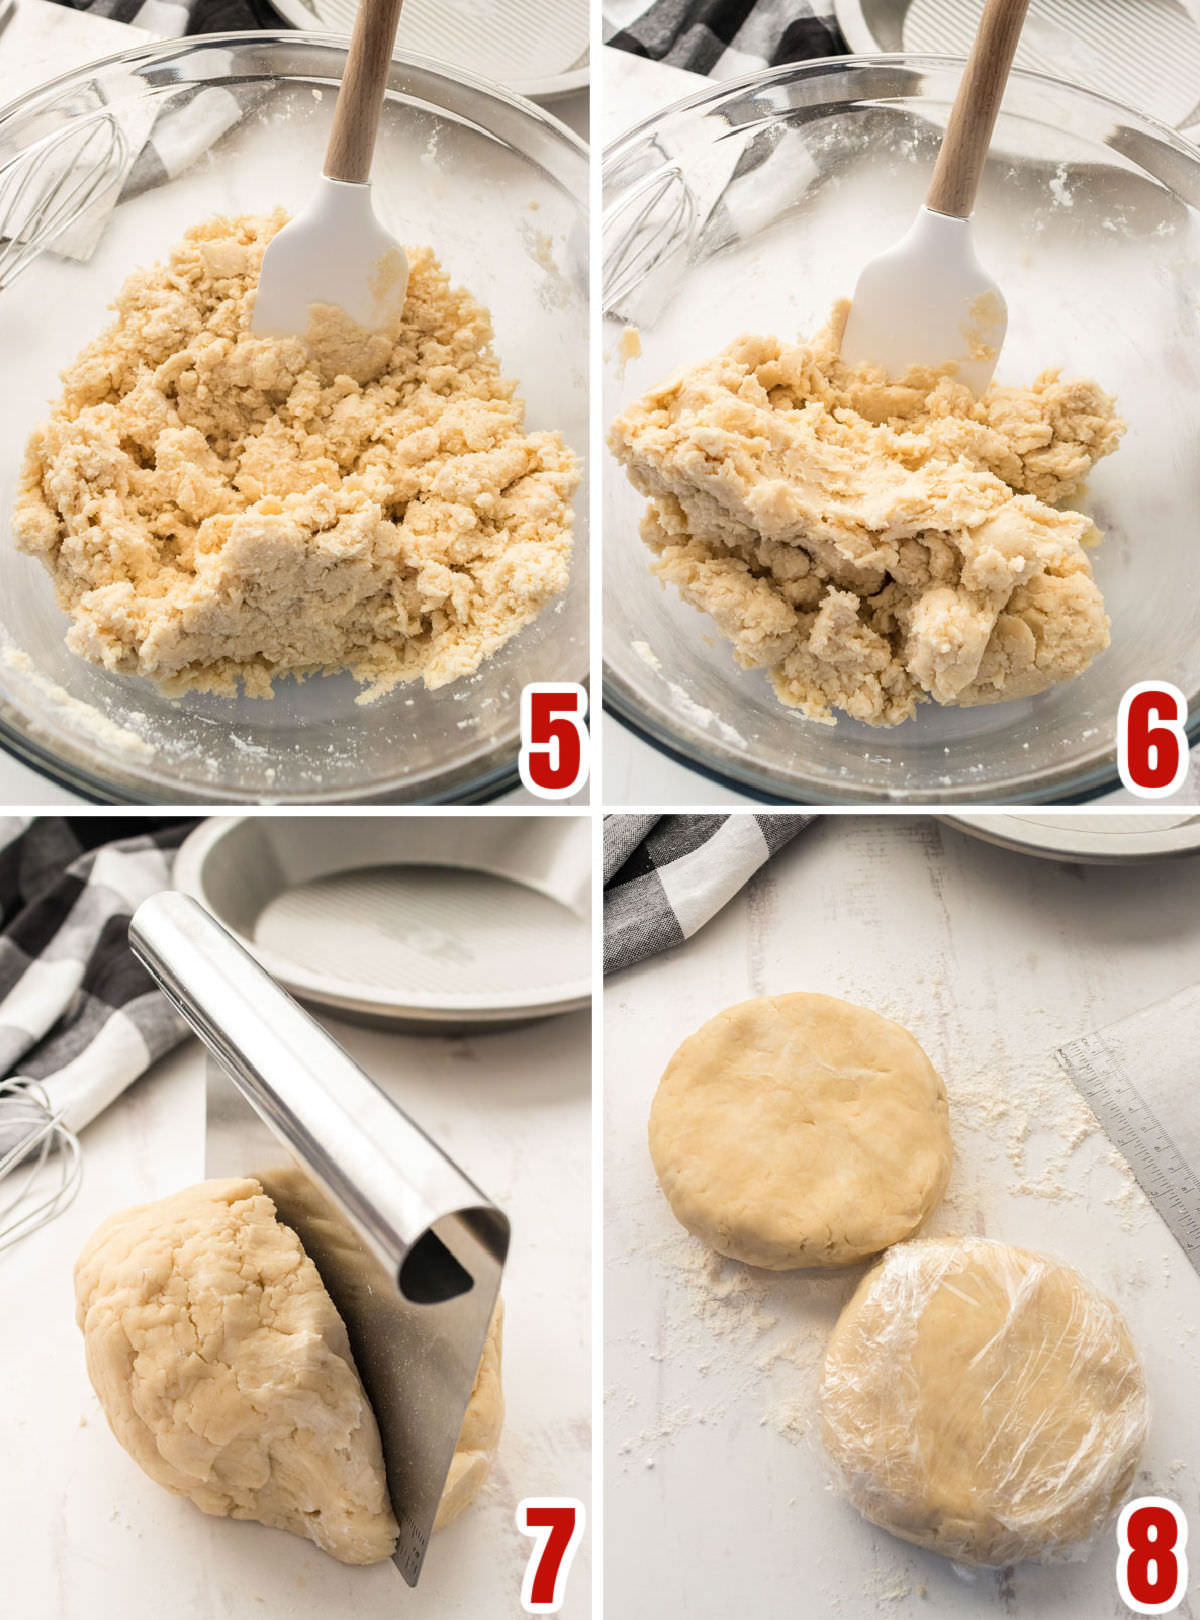 Collage image showing how to prepare the pie crust dough for rolling out.